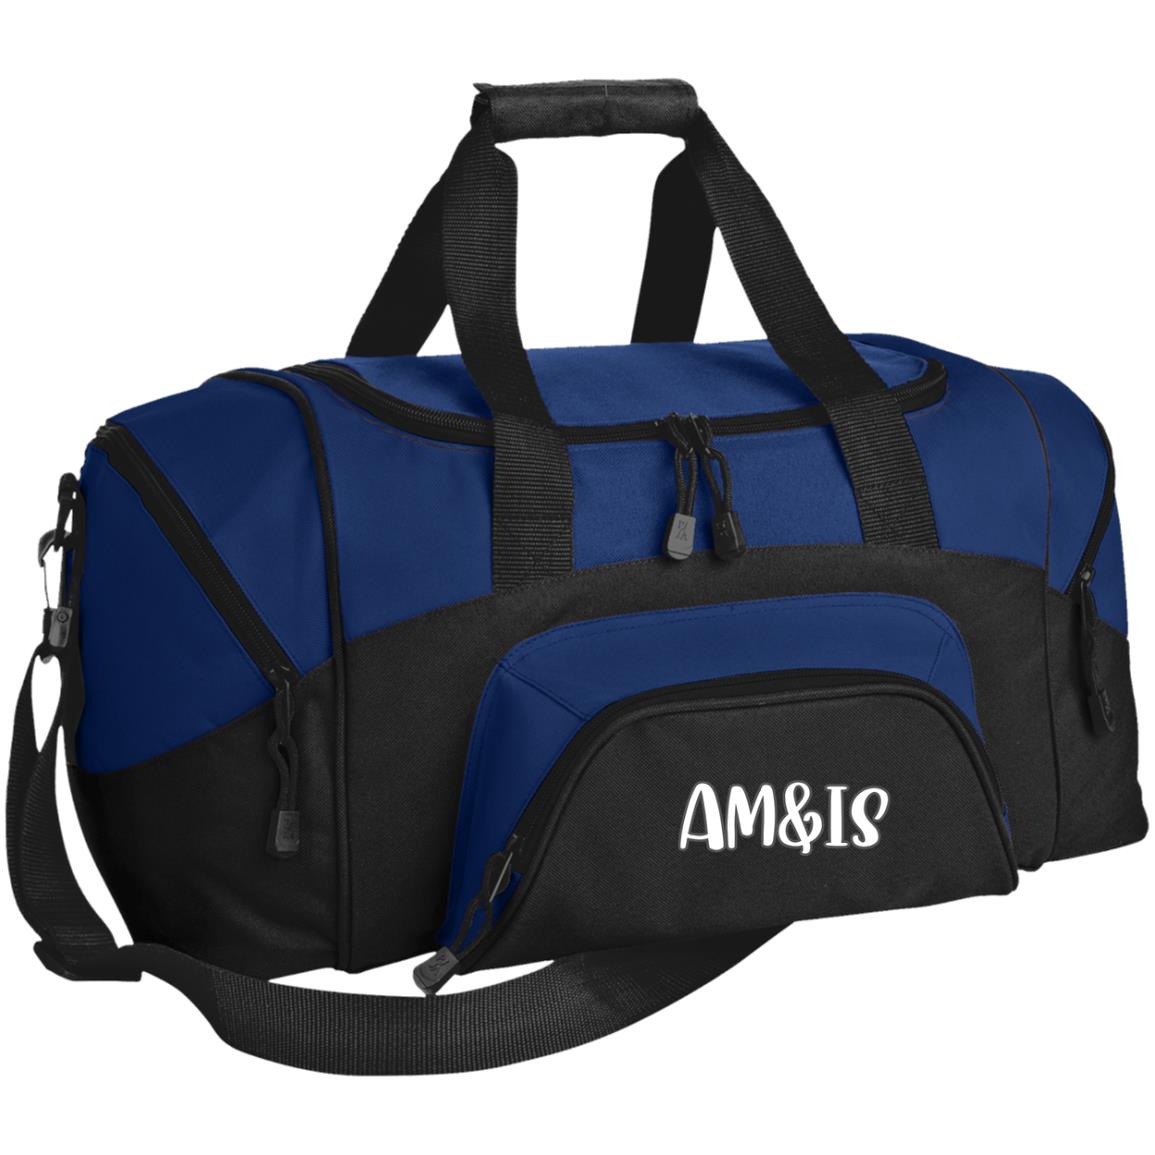 BLACK TRUE ROYAL ONE SIZE - AM&IS Activewear Small Colorblock Sport Duffel Bag - duffel bag at TFC&H Co.